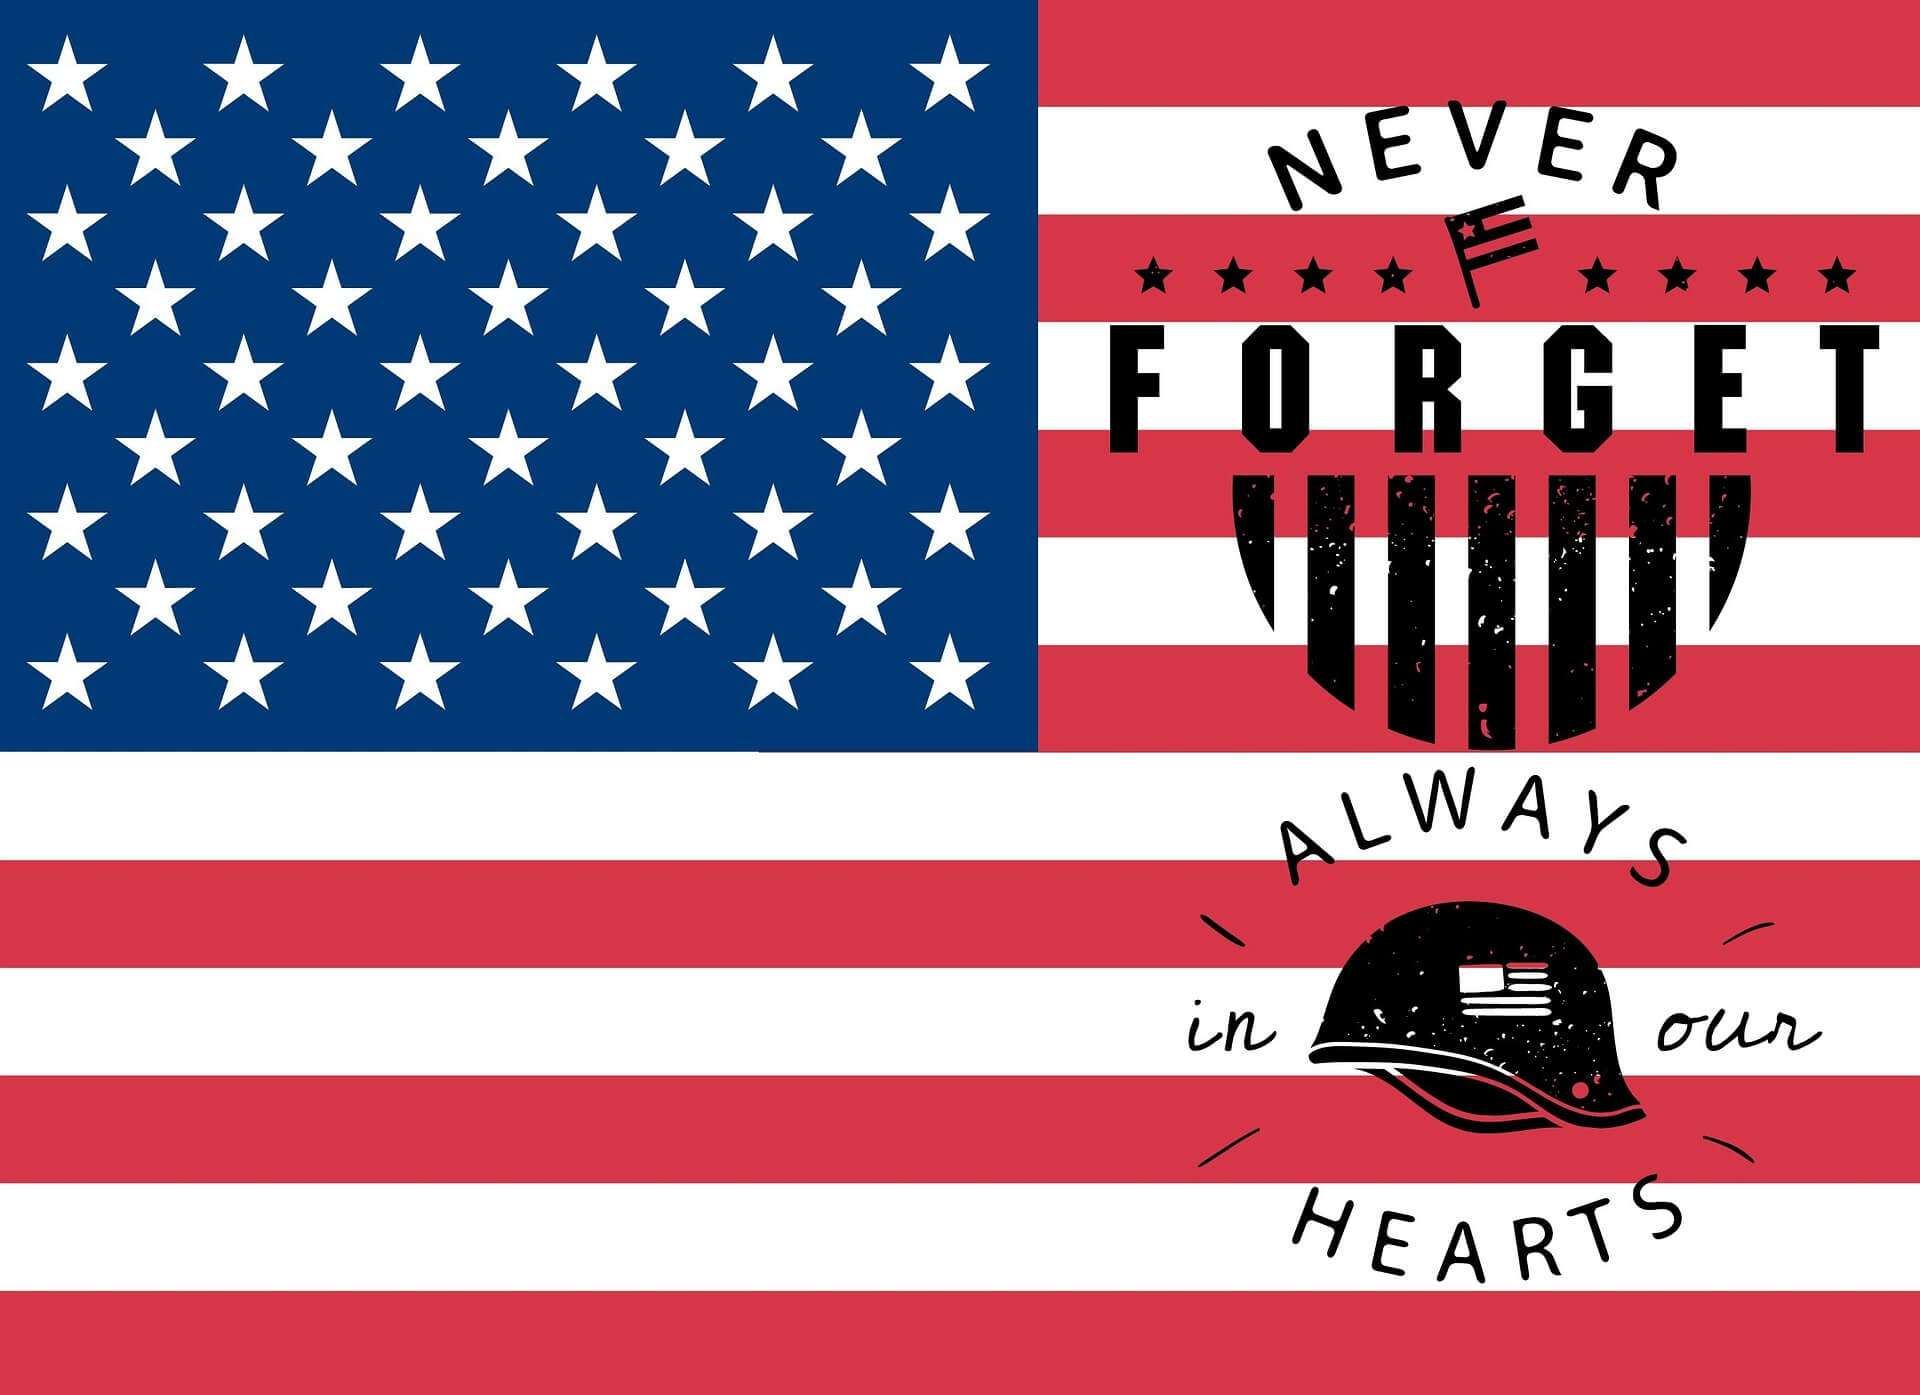 American Flag saying "Never Forget" and "Always in our Hearts"